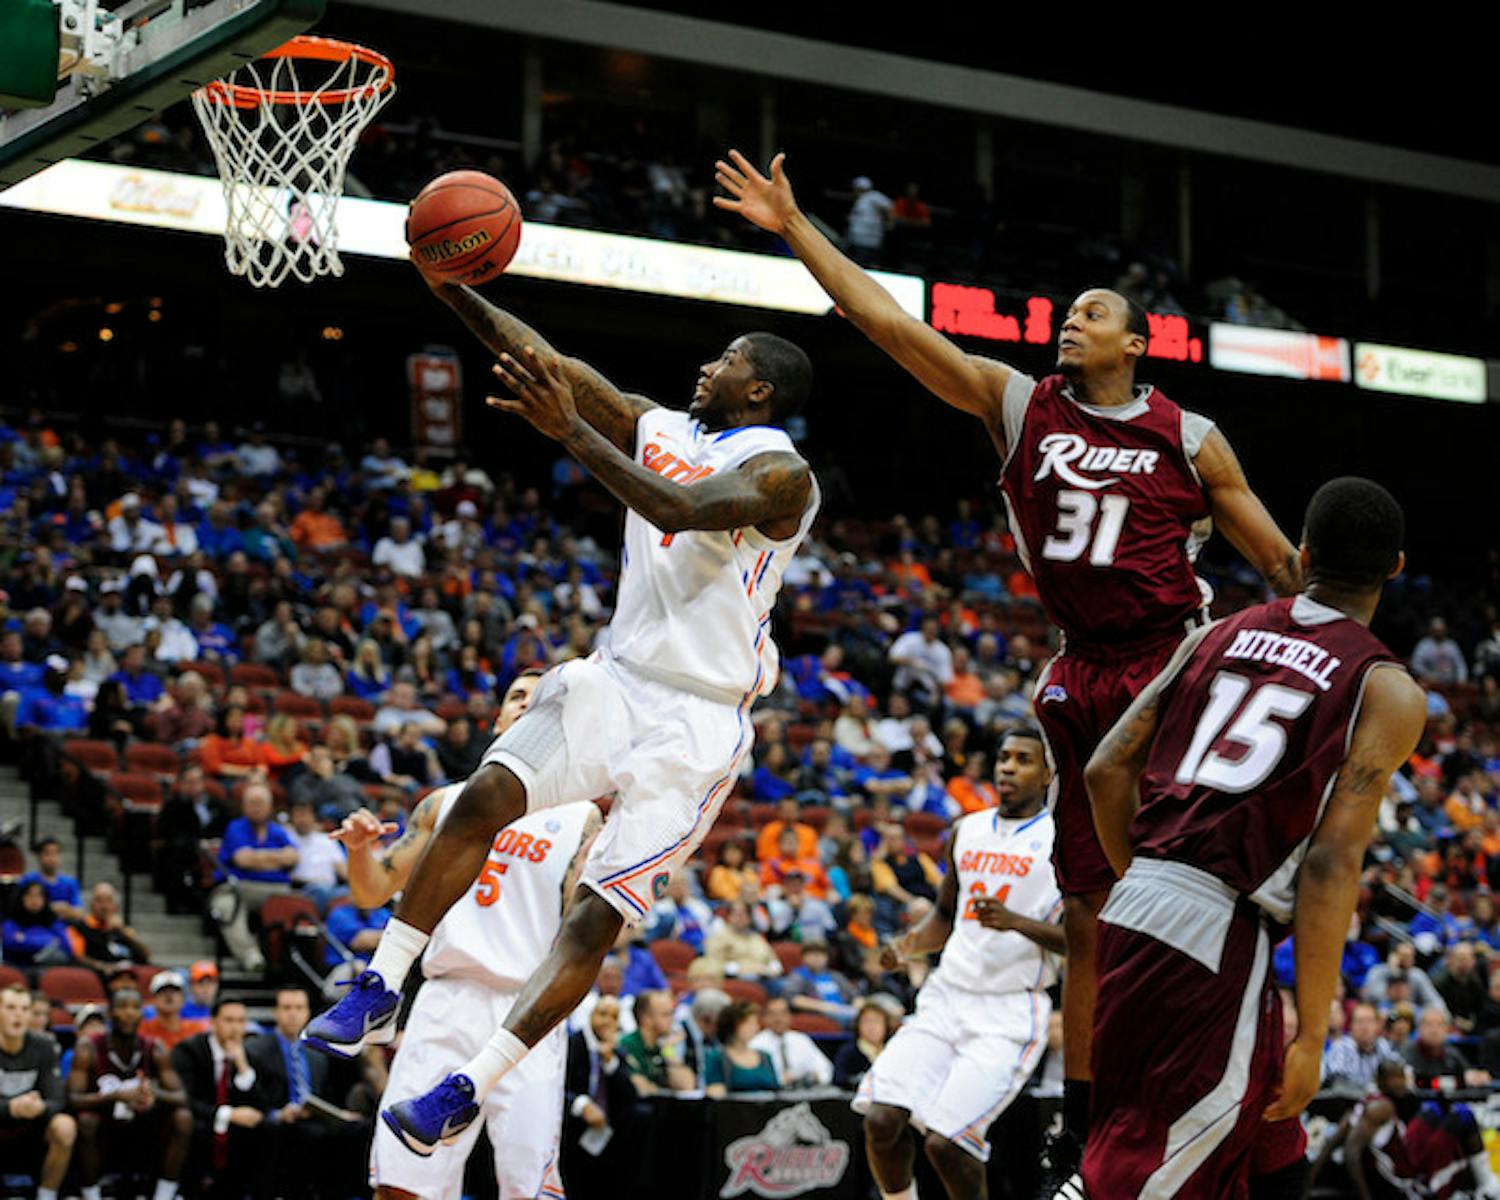 Junior guard Kenny Boynton's 26 points were two away from his career high during Florida's 90-69 win against Rider.